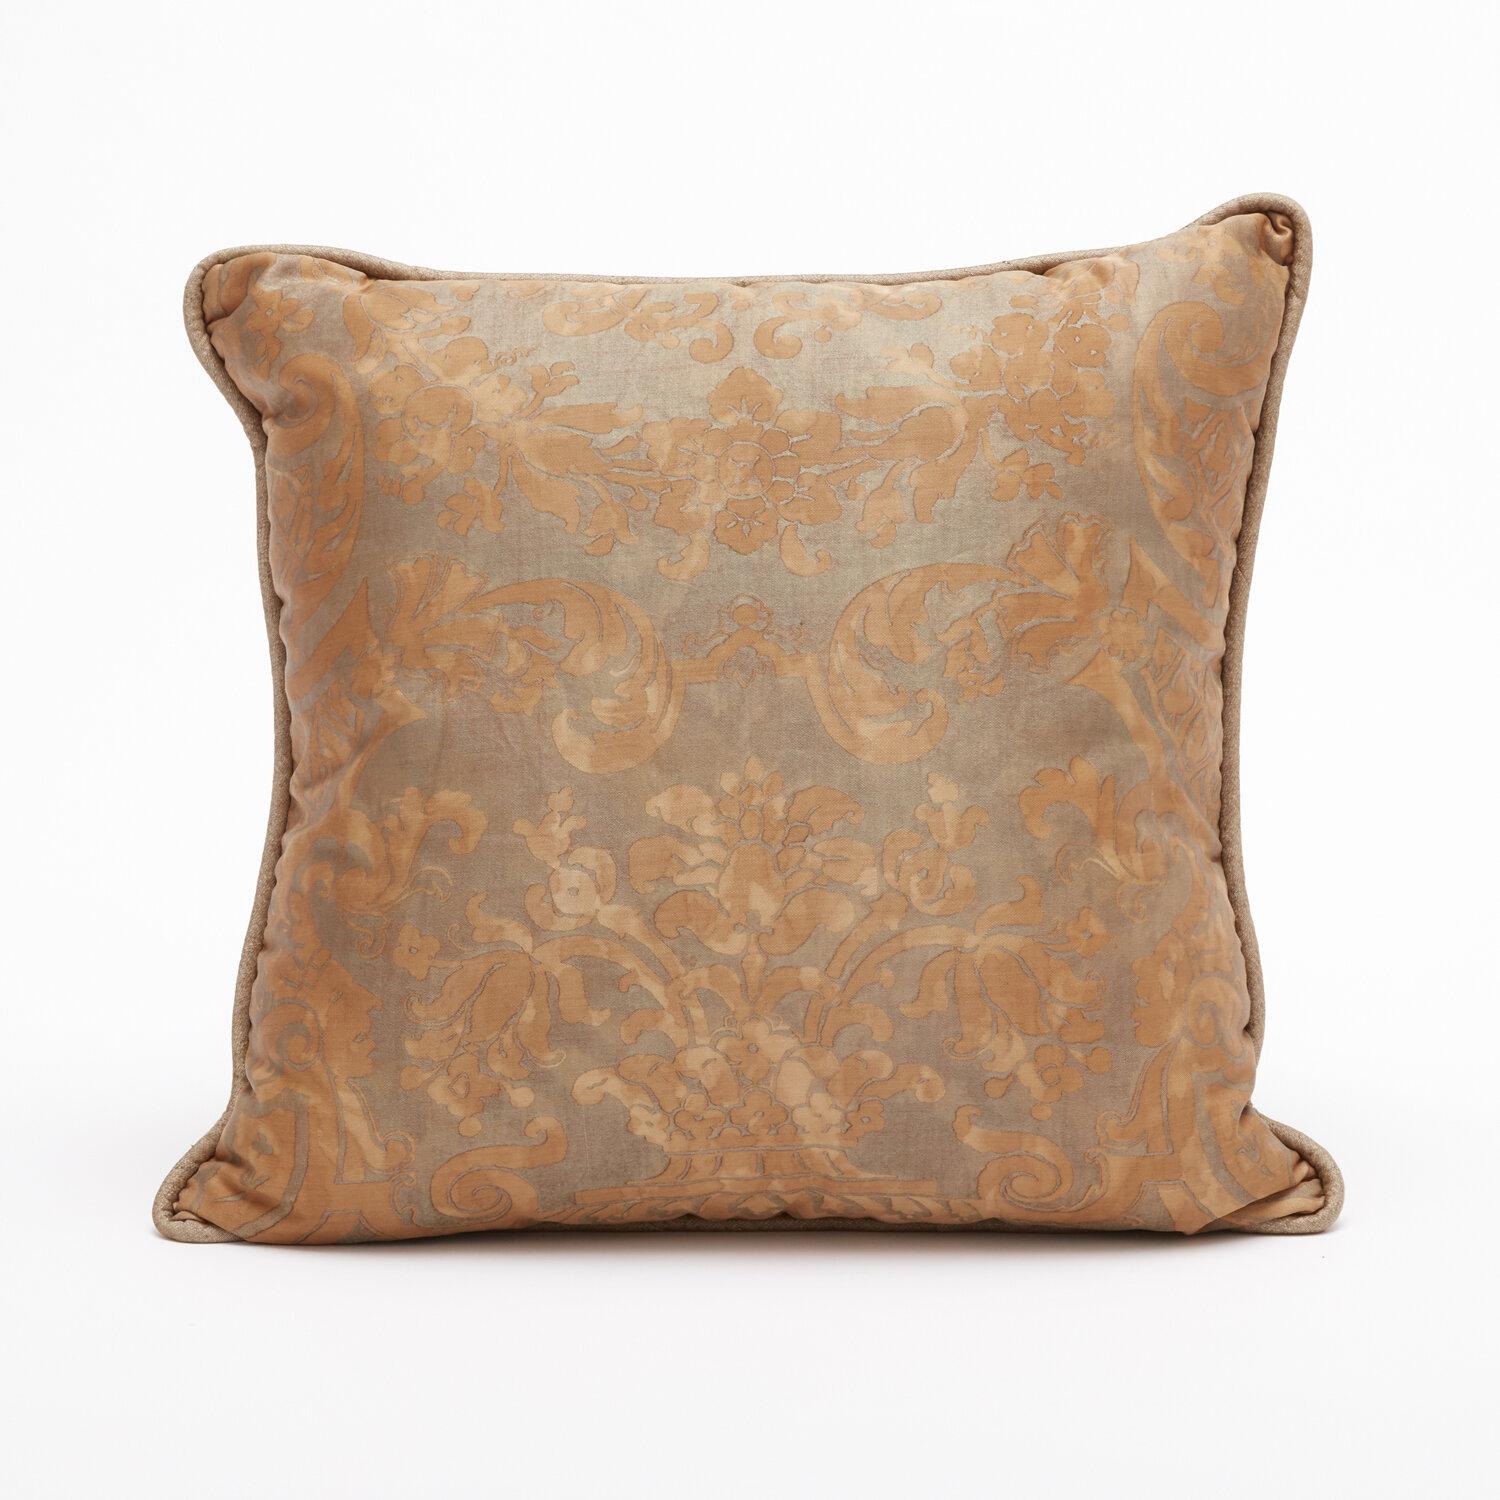 Contemporary Pair of Fortuny Fabric Cushions in the Carnavalet Pattern For Sale